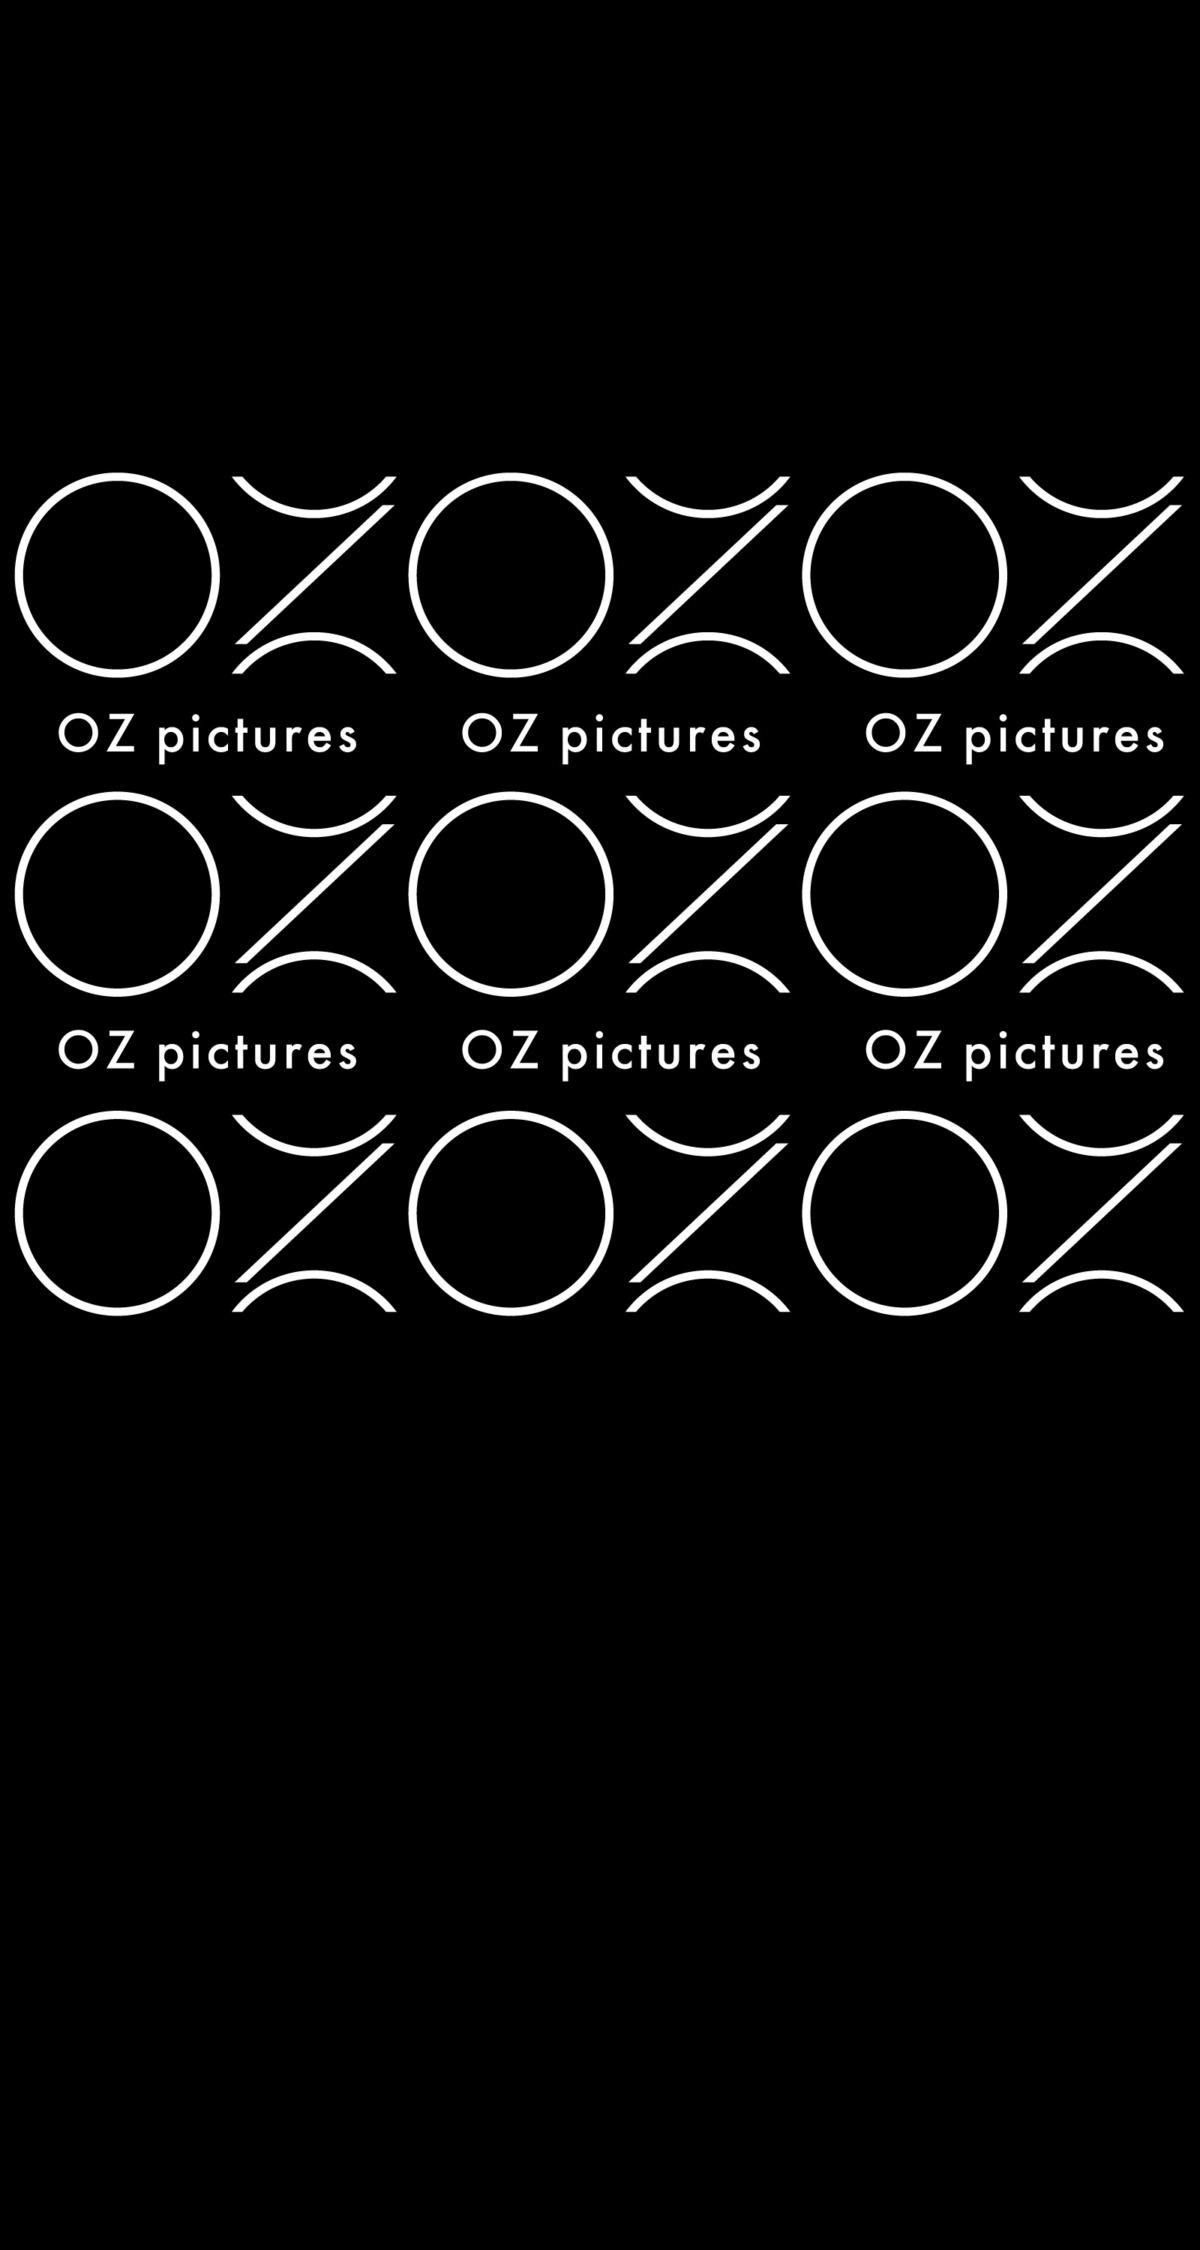 OZ pictures